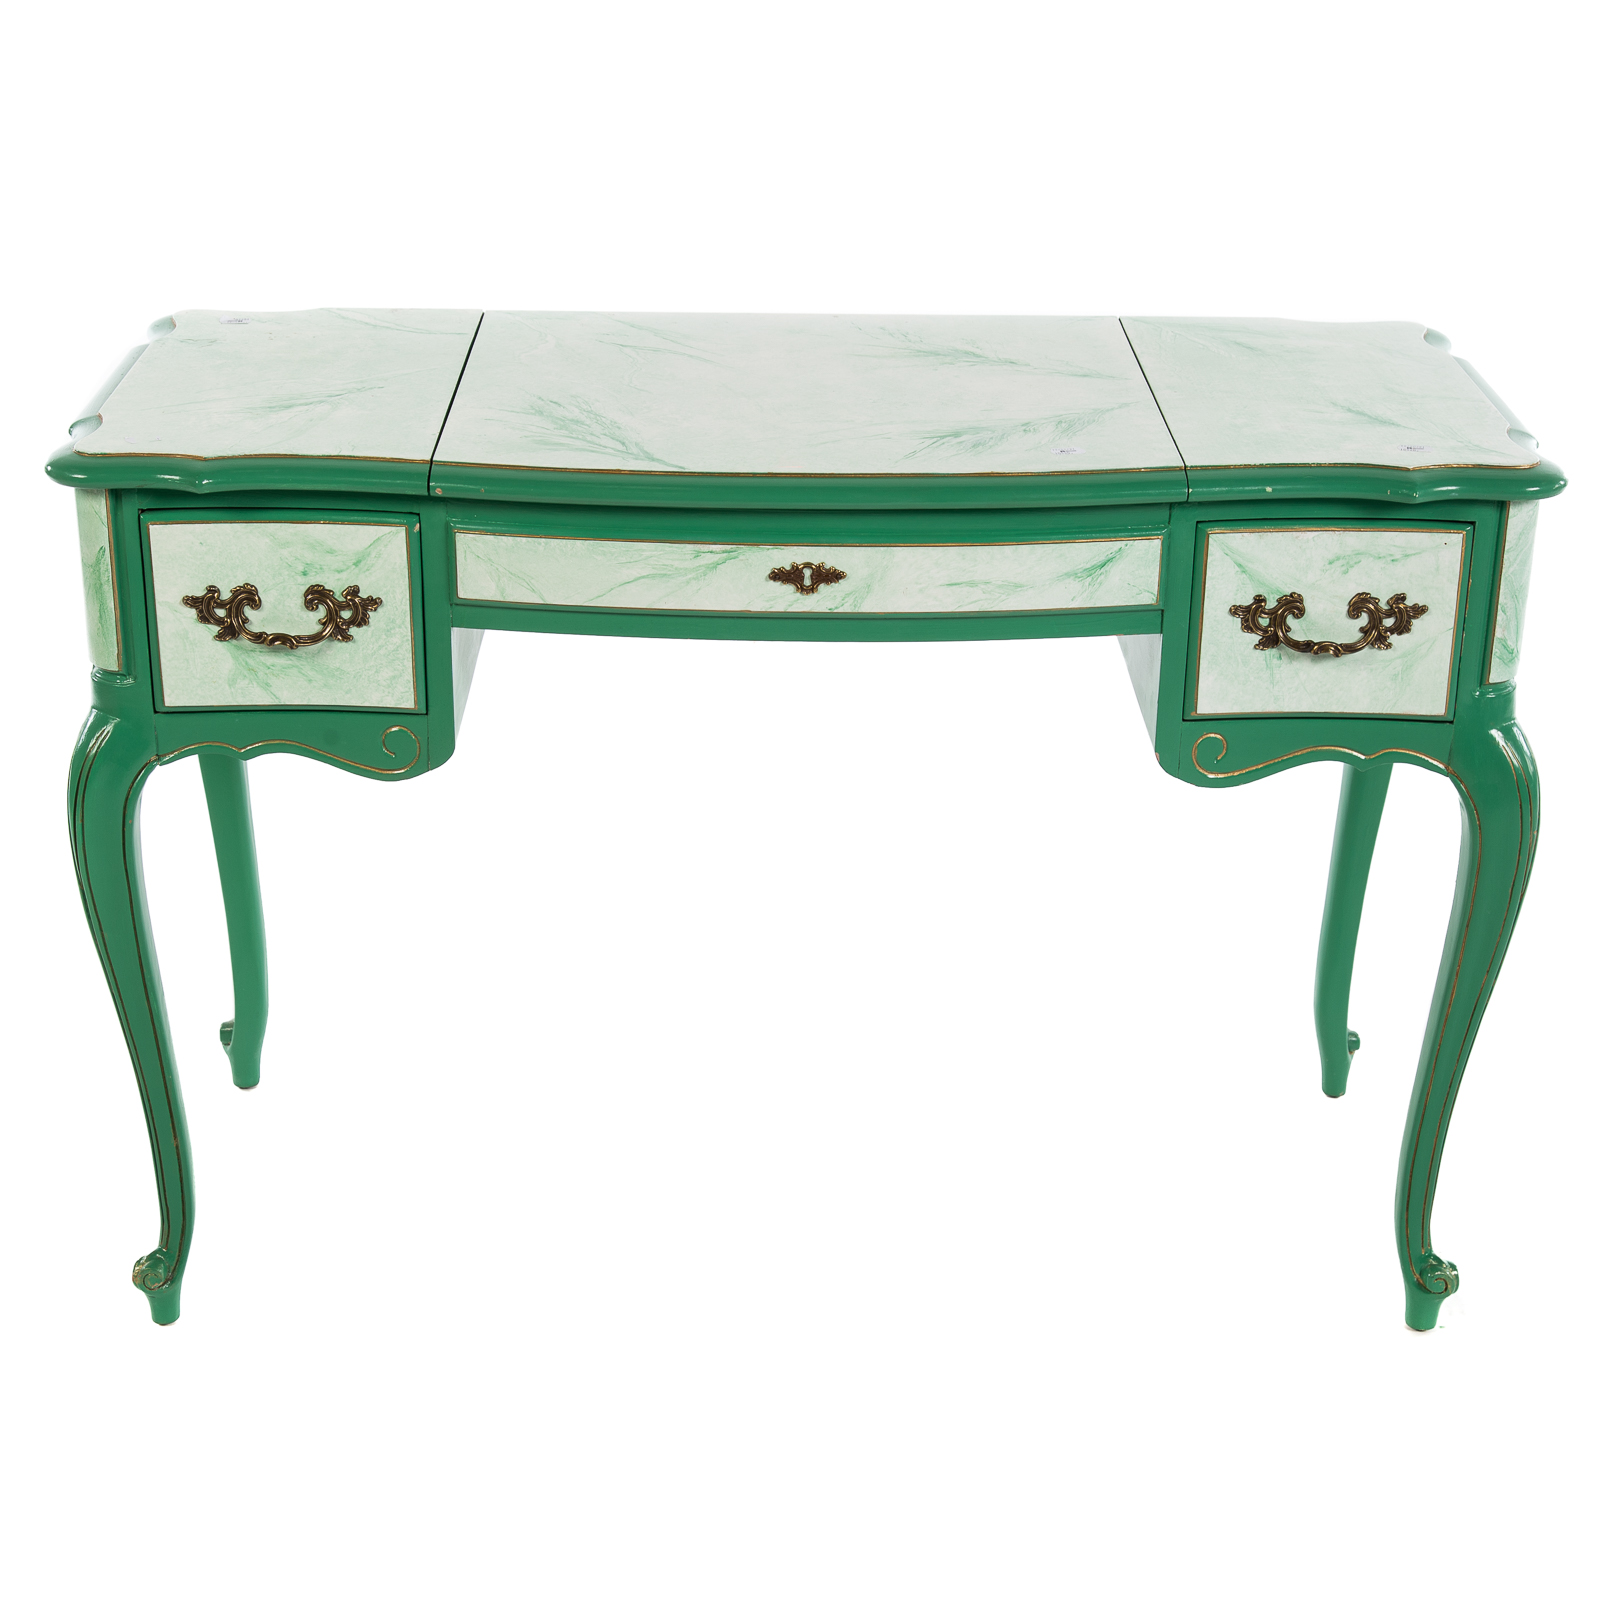 LOUIS XV STYLE PAINTED FLIP-TOP